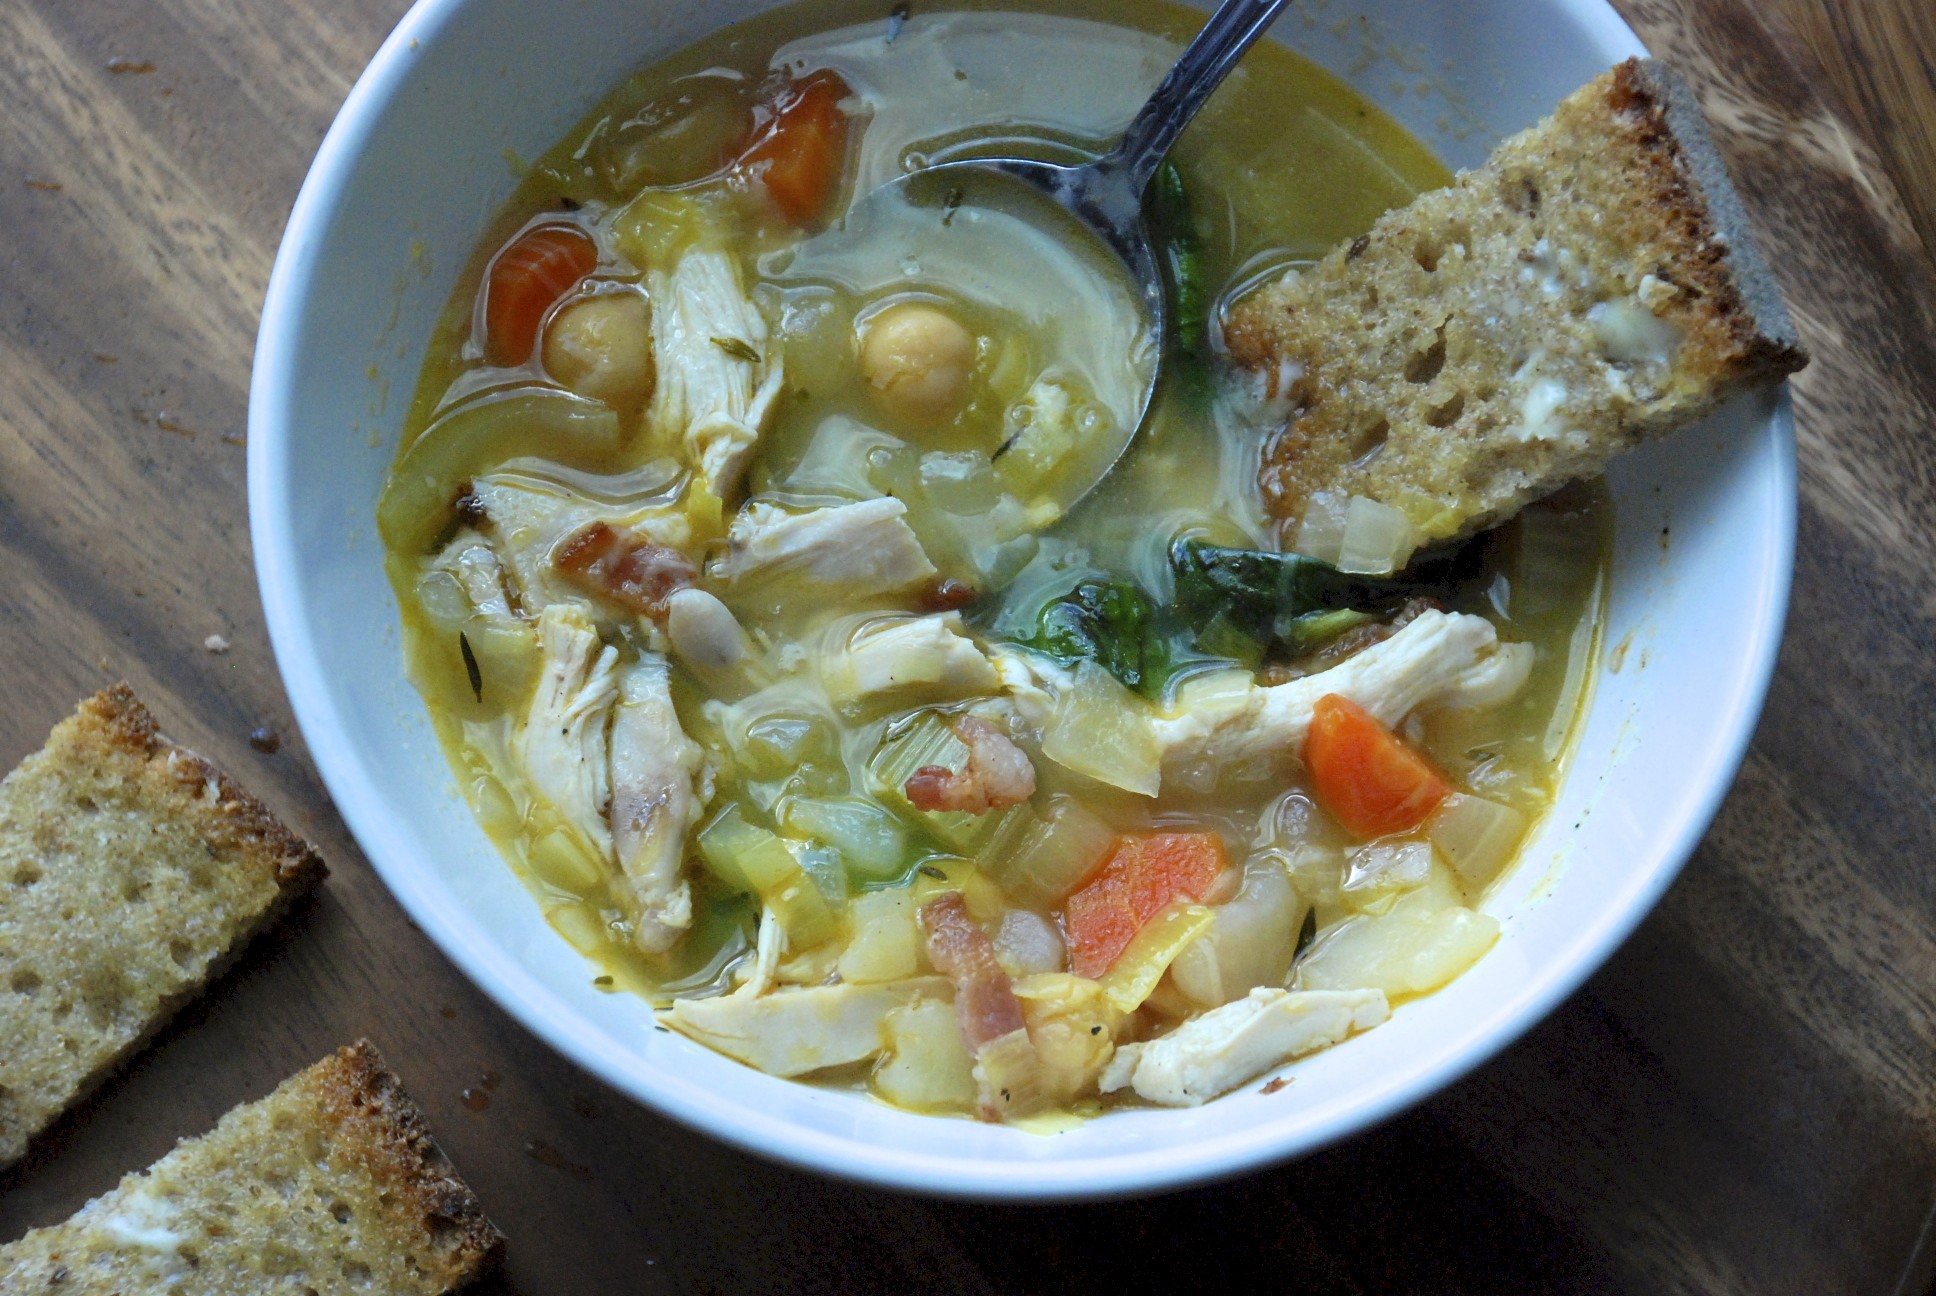 Doggy Bag Chicken Soup Recipe on Food52